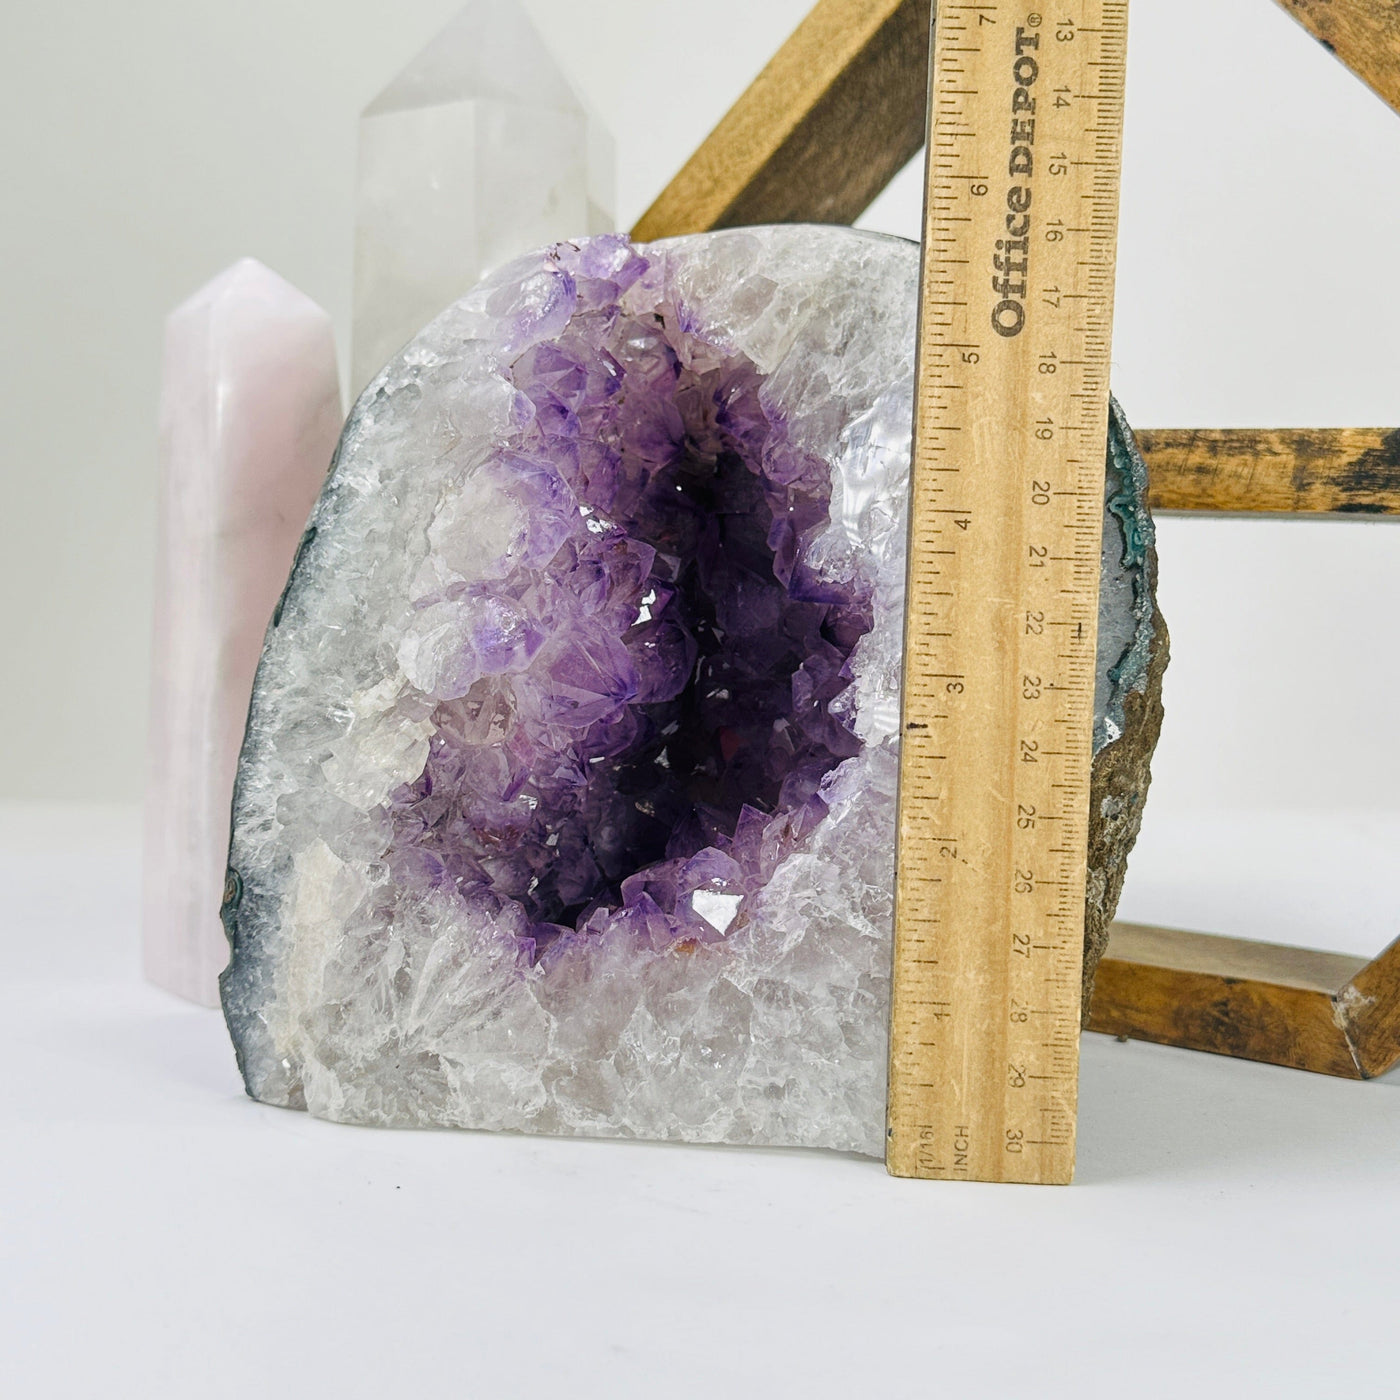 amethyst geode next to a ruler for size reference